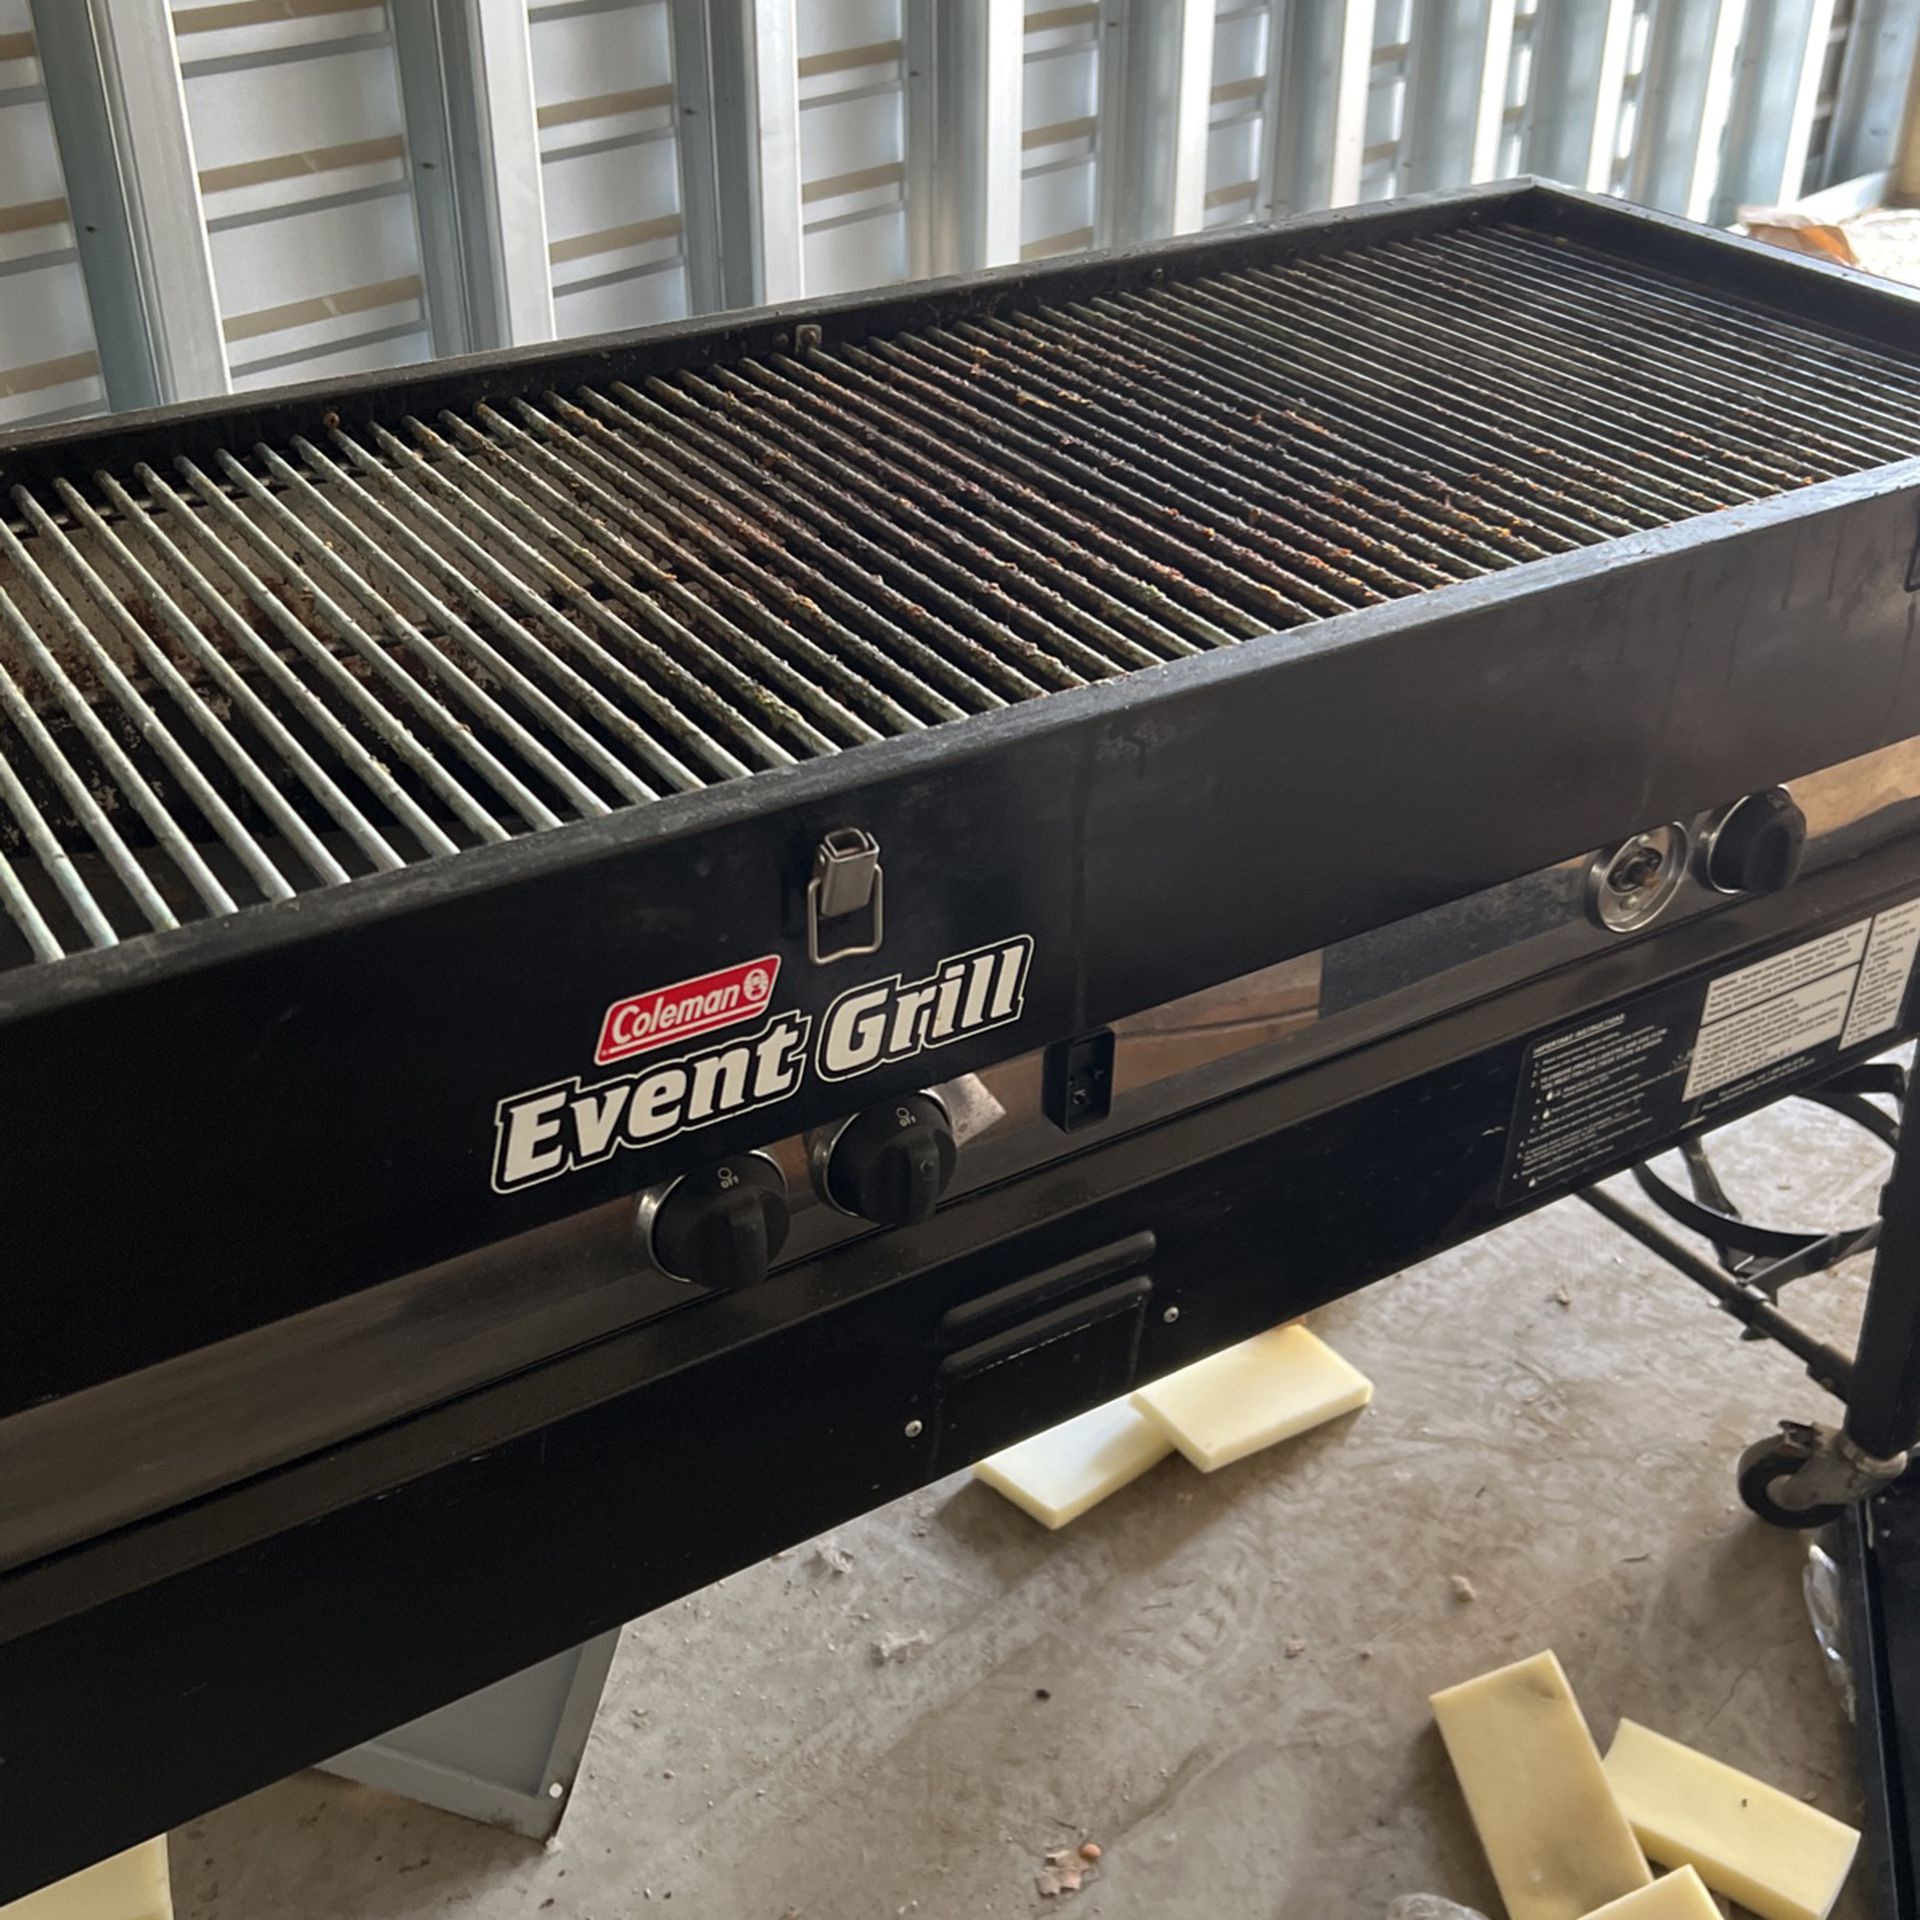 Johnsonville Sausage Grill for Sale in Irvine, CA - OfferUp